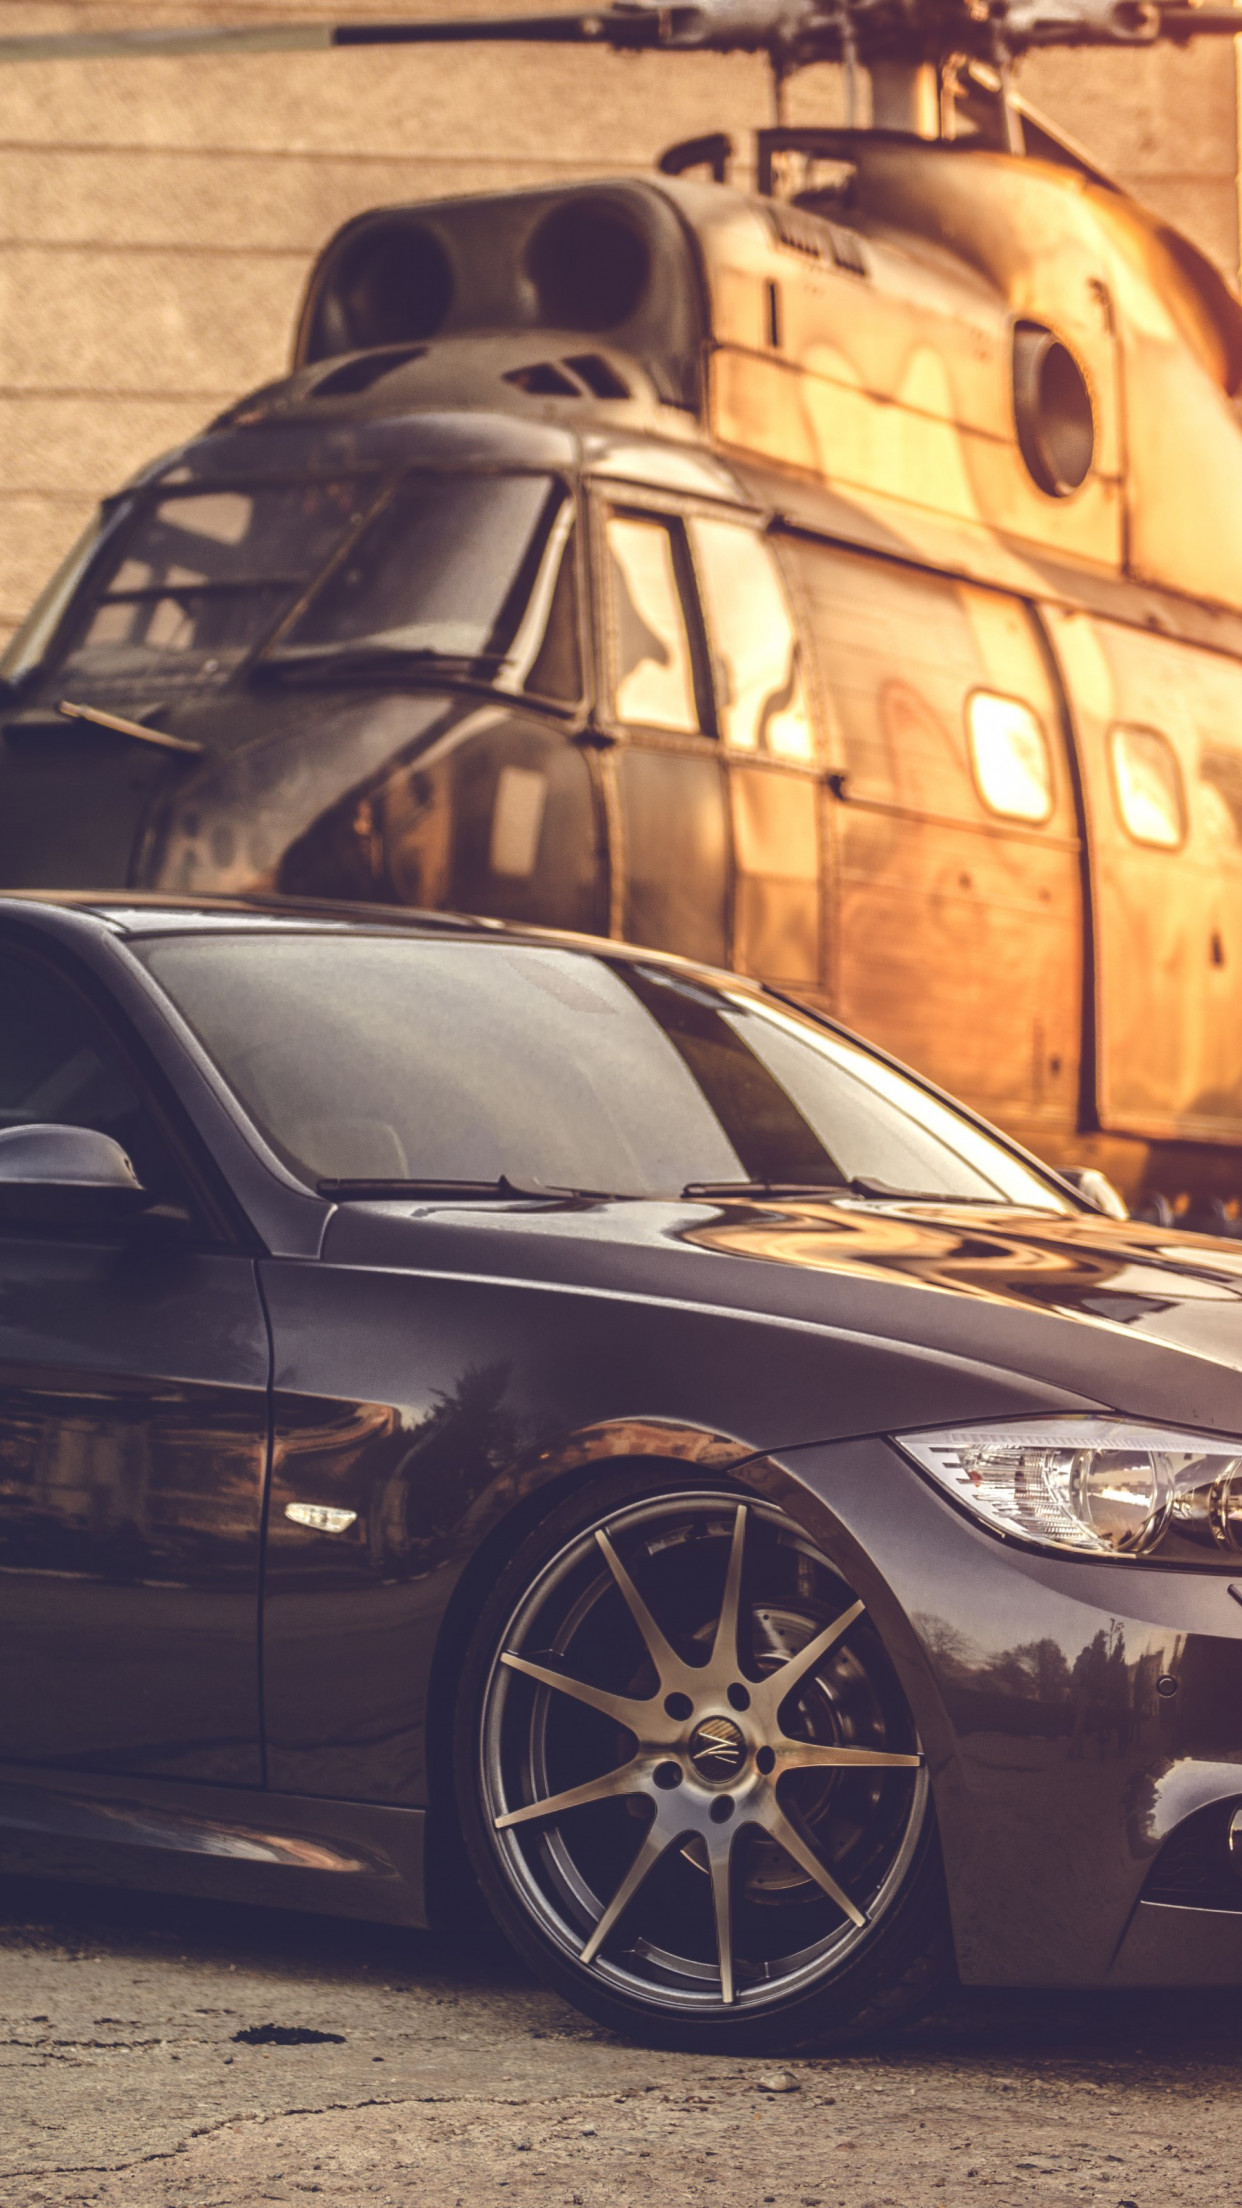 BMW E90 and one helicopter wallpaper 1242x2208